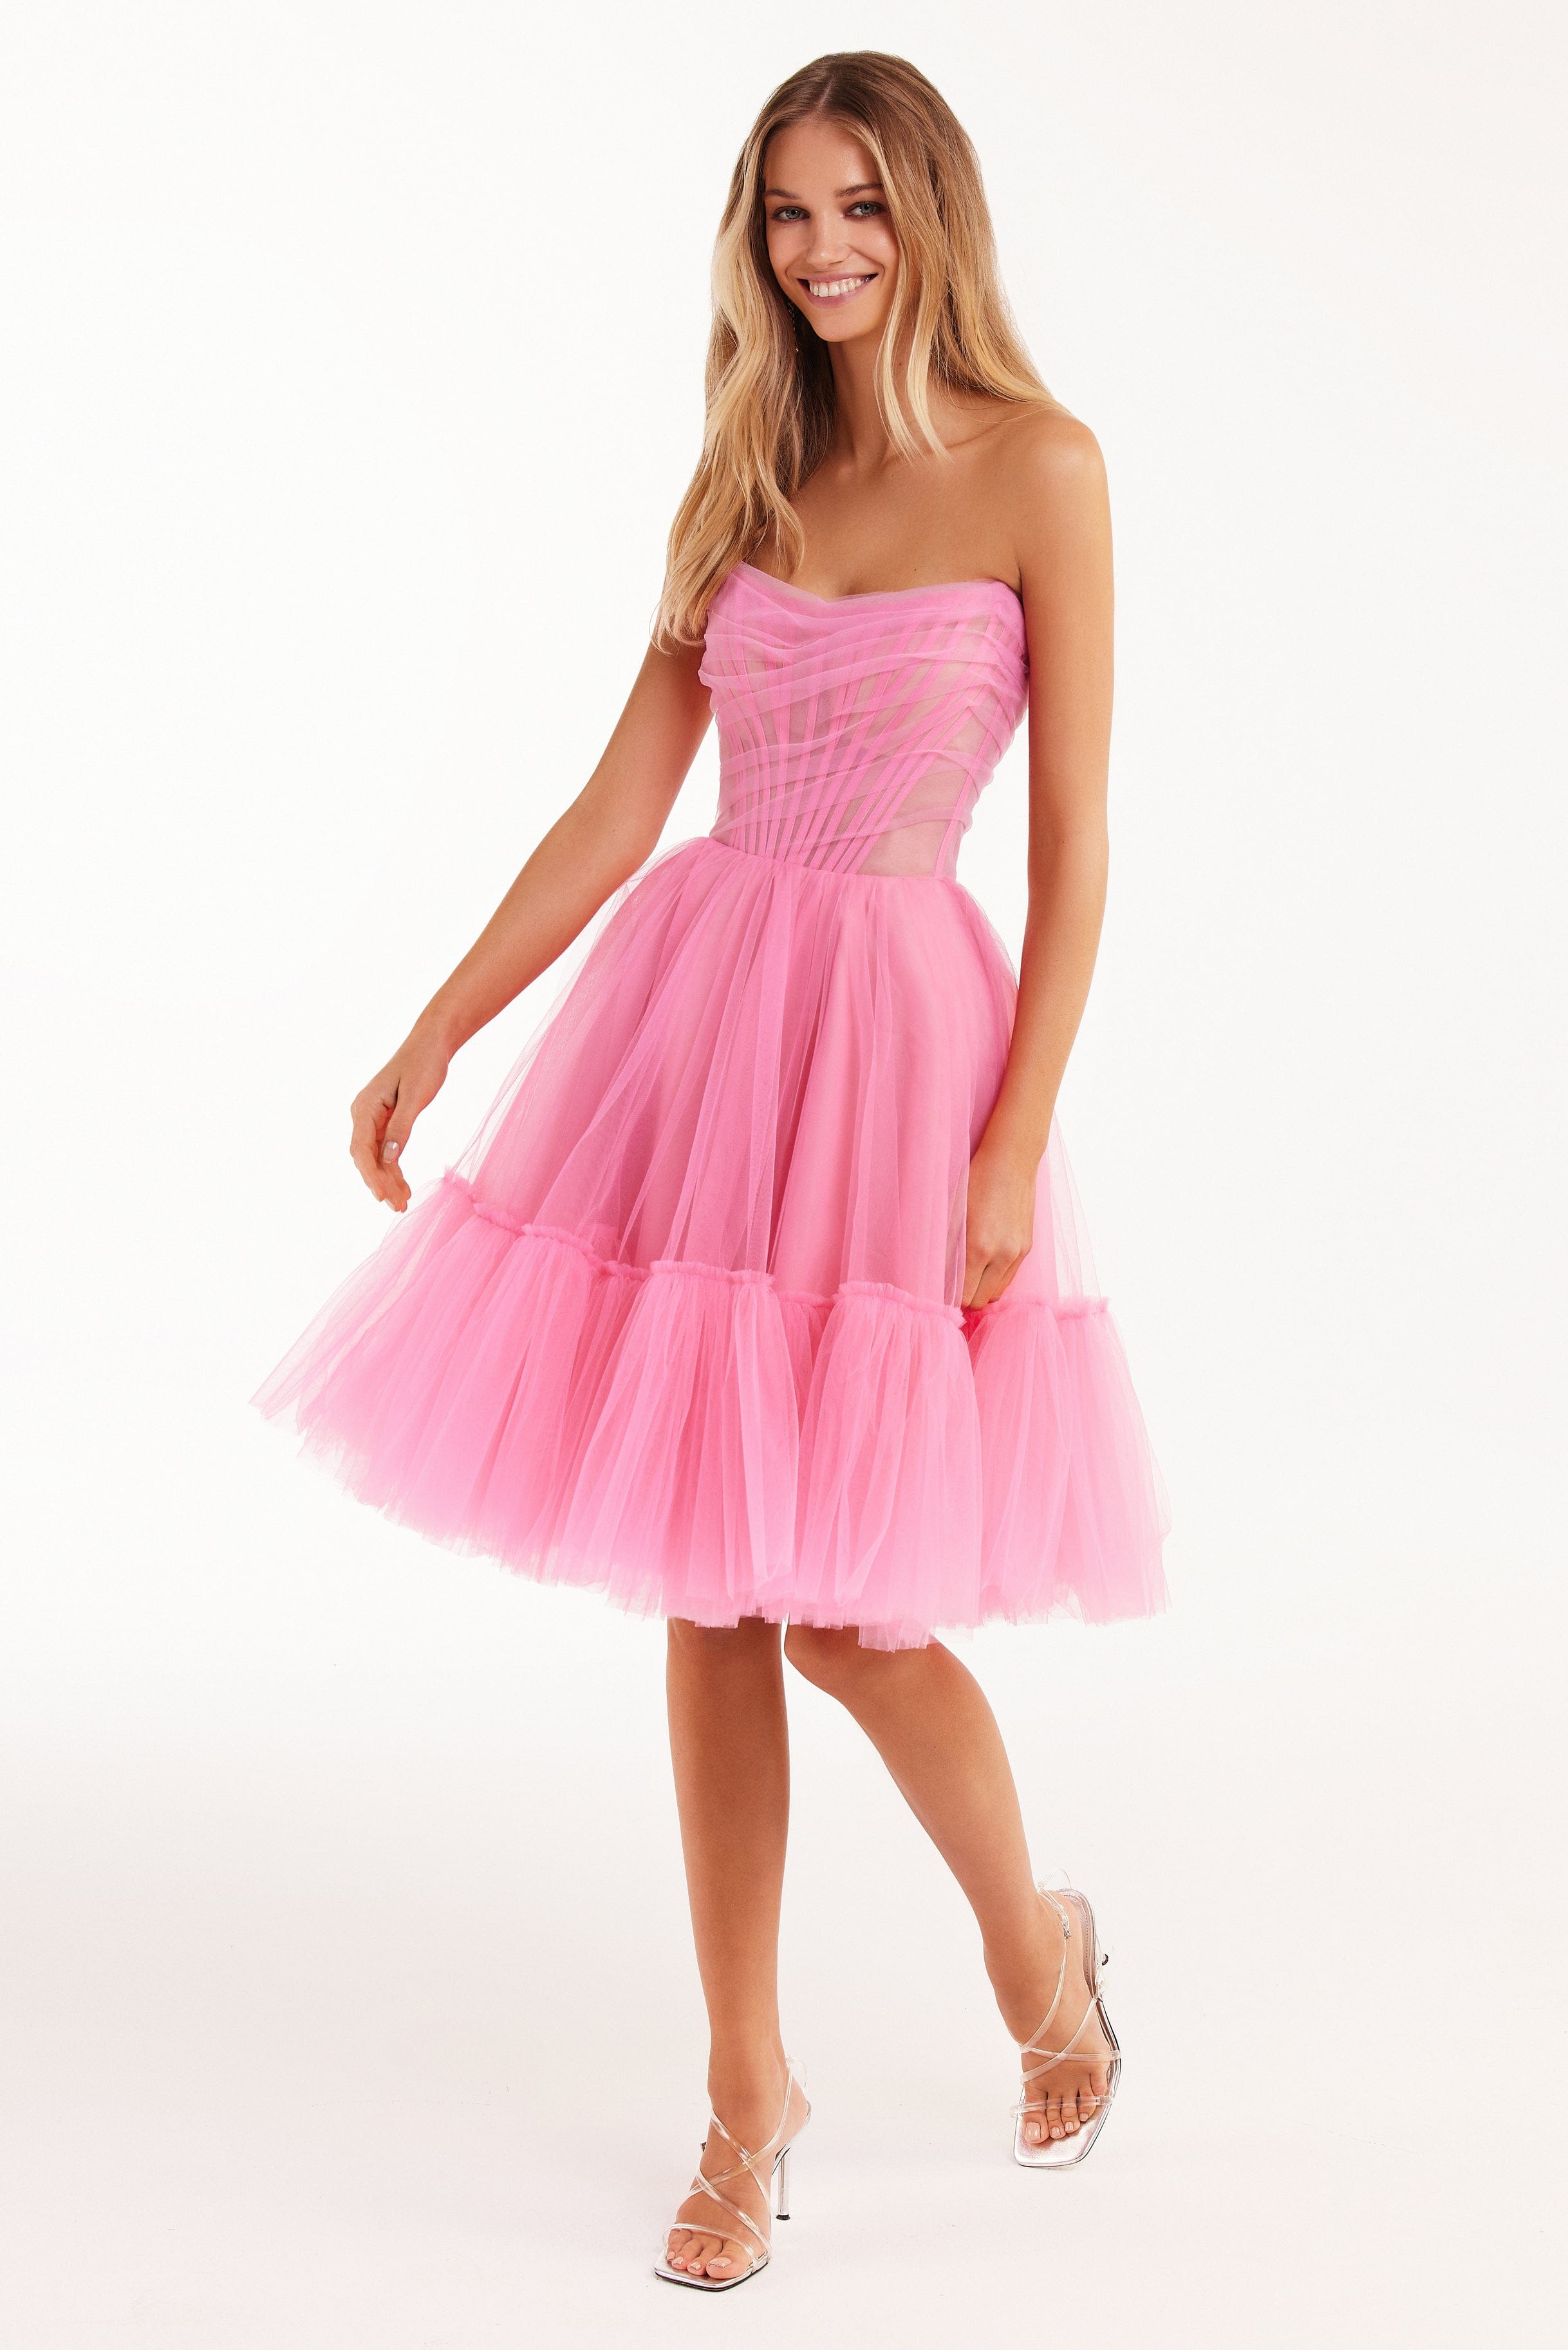 All-In-Pink bustier tulle dress